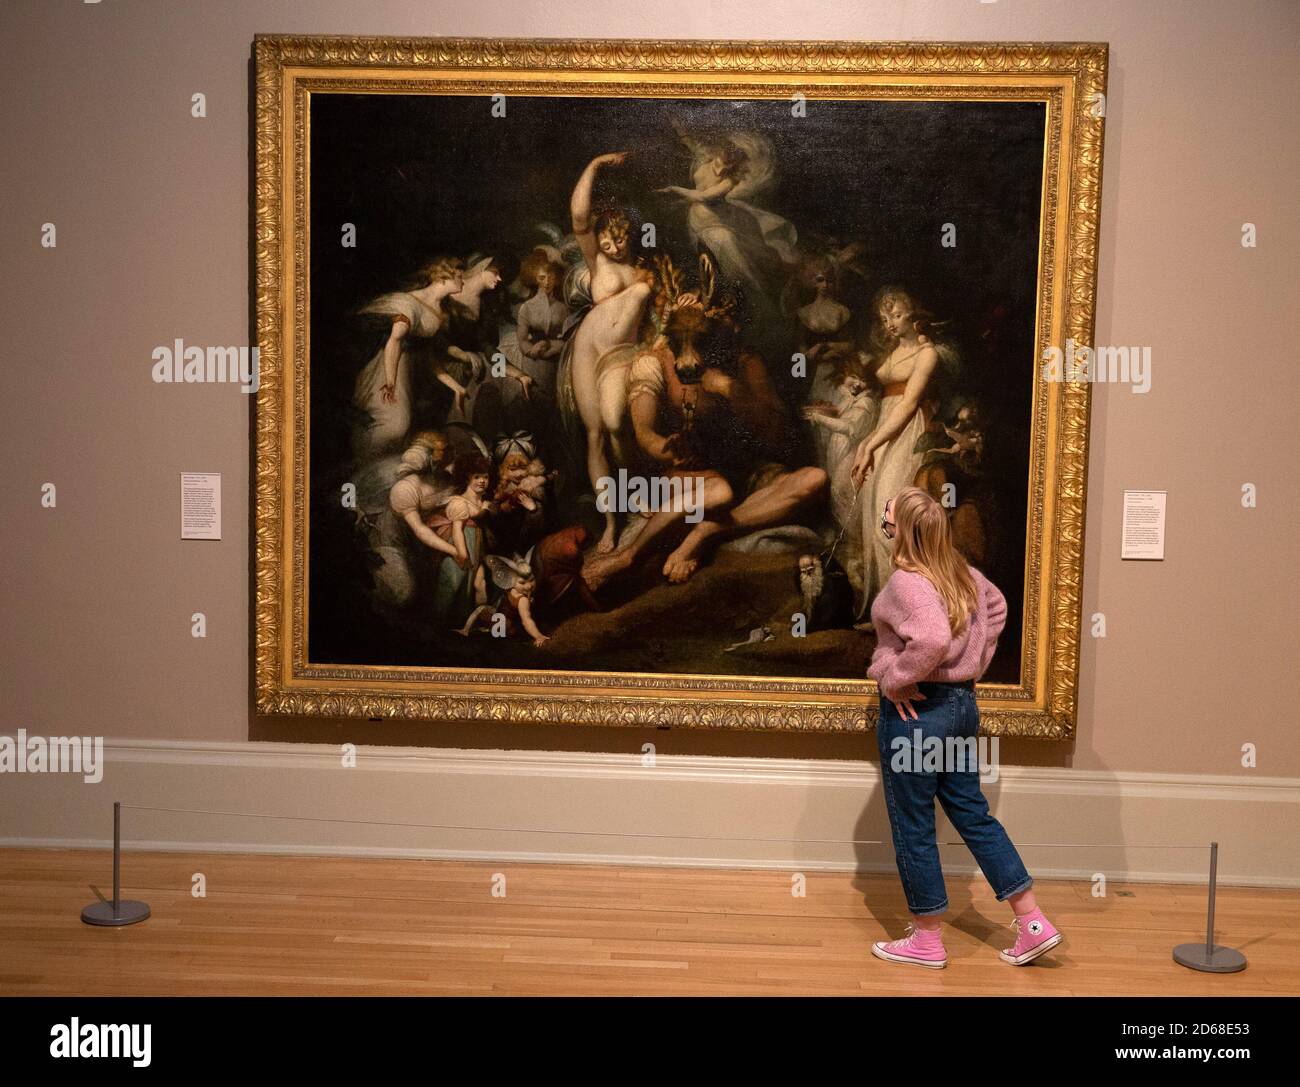 London, UK. 15th Oct, 2020. Titania and Bottom by Henry Fuseli c 1790. The grand painting shows a scene from Shakespear's' A Midsummer Nights Dream'. This room at the Tate depicts works that include Fairies Tate Britain opens New Collection routes Credit: Mark Thomas/Alamy Live News Stock Photo